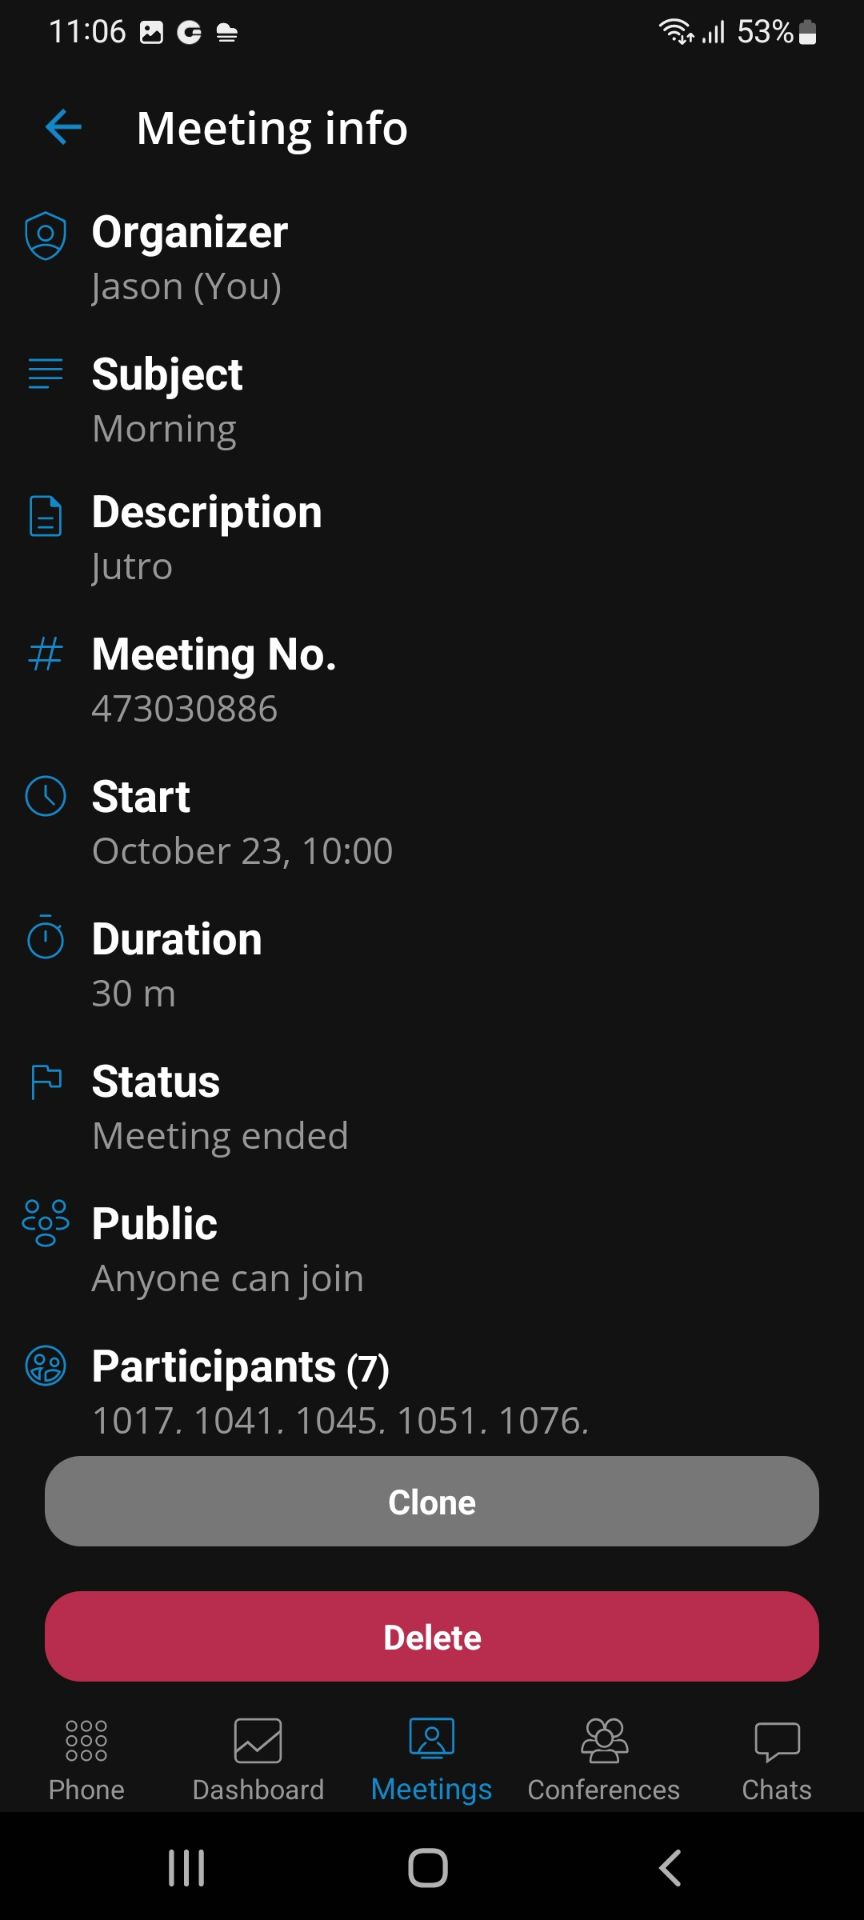 android-meeting-info-options-4.jpg